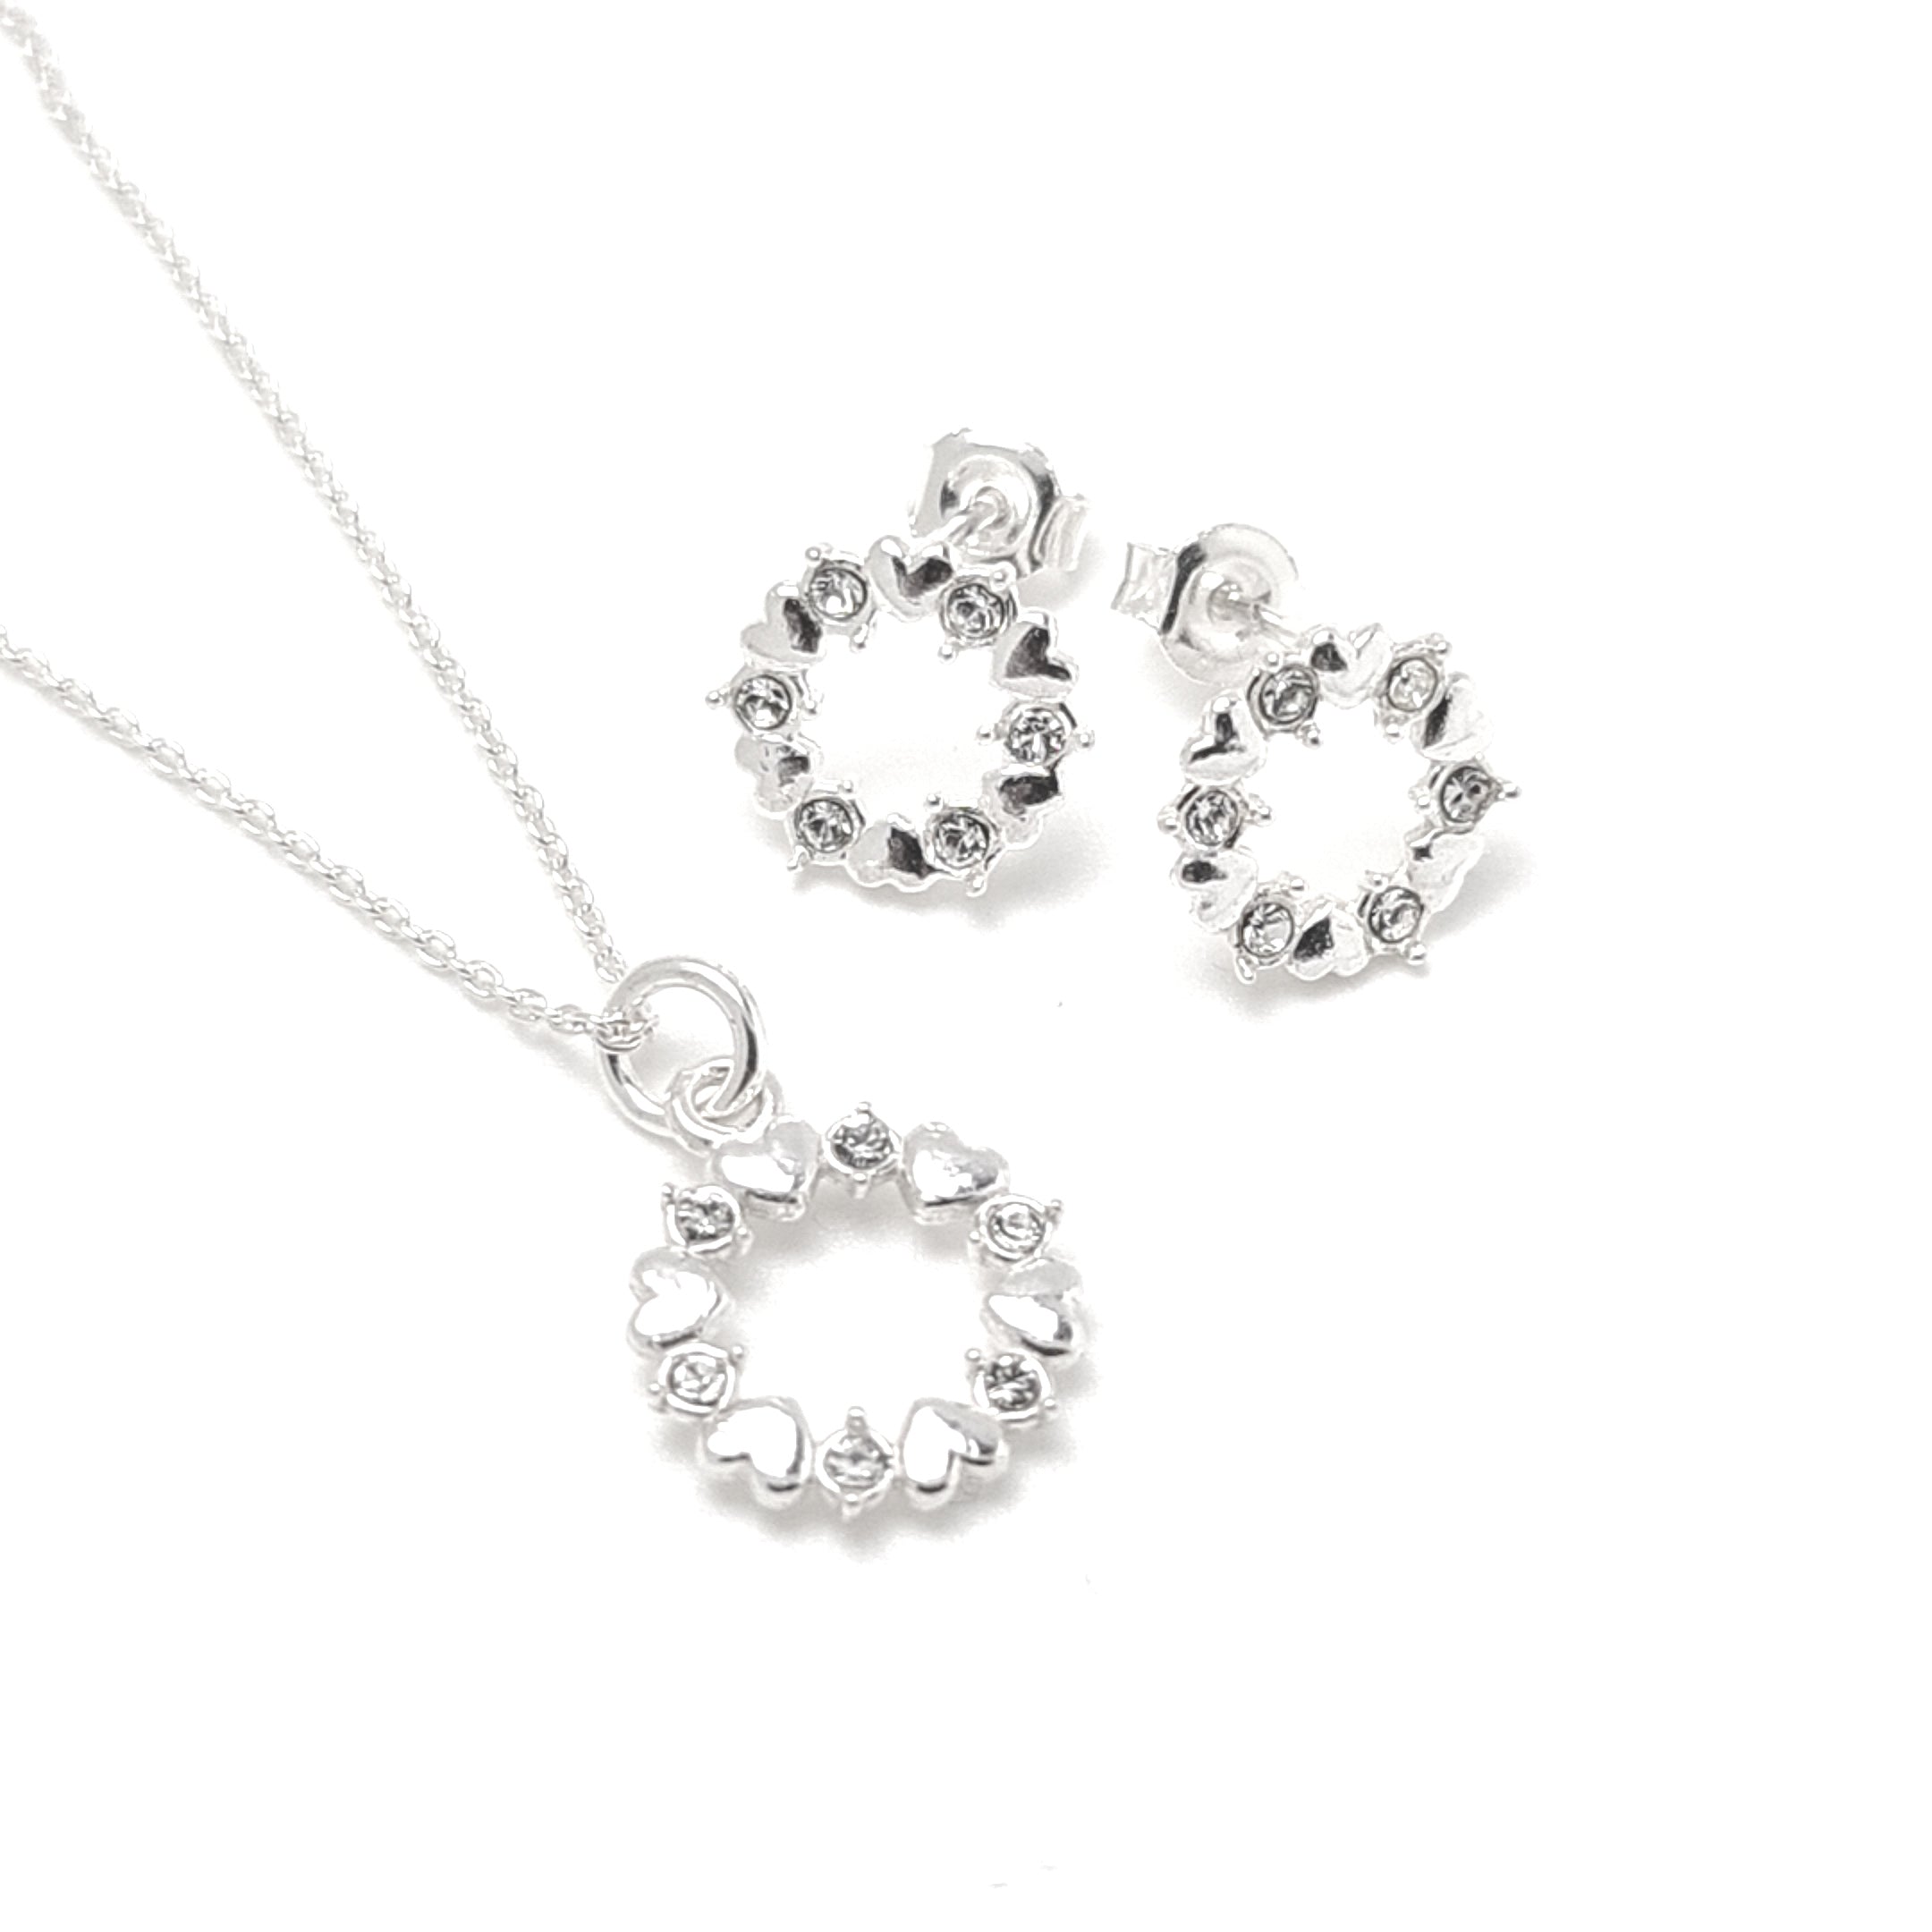 Crystal Harmony Jewellery Set – Circular stud earrings and circular pendant necklace with silver hearts and round crystals in sterling silver by Magpie Gems.